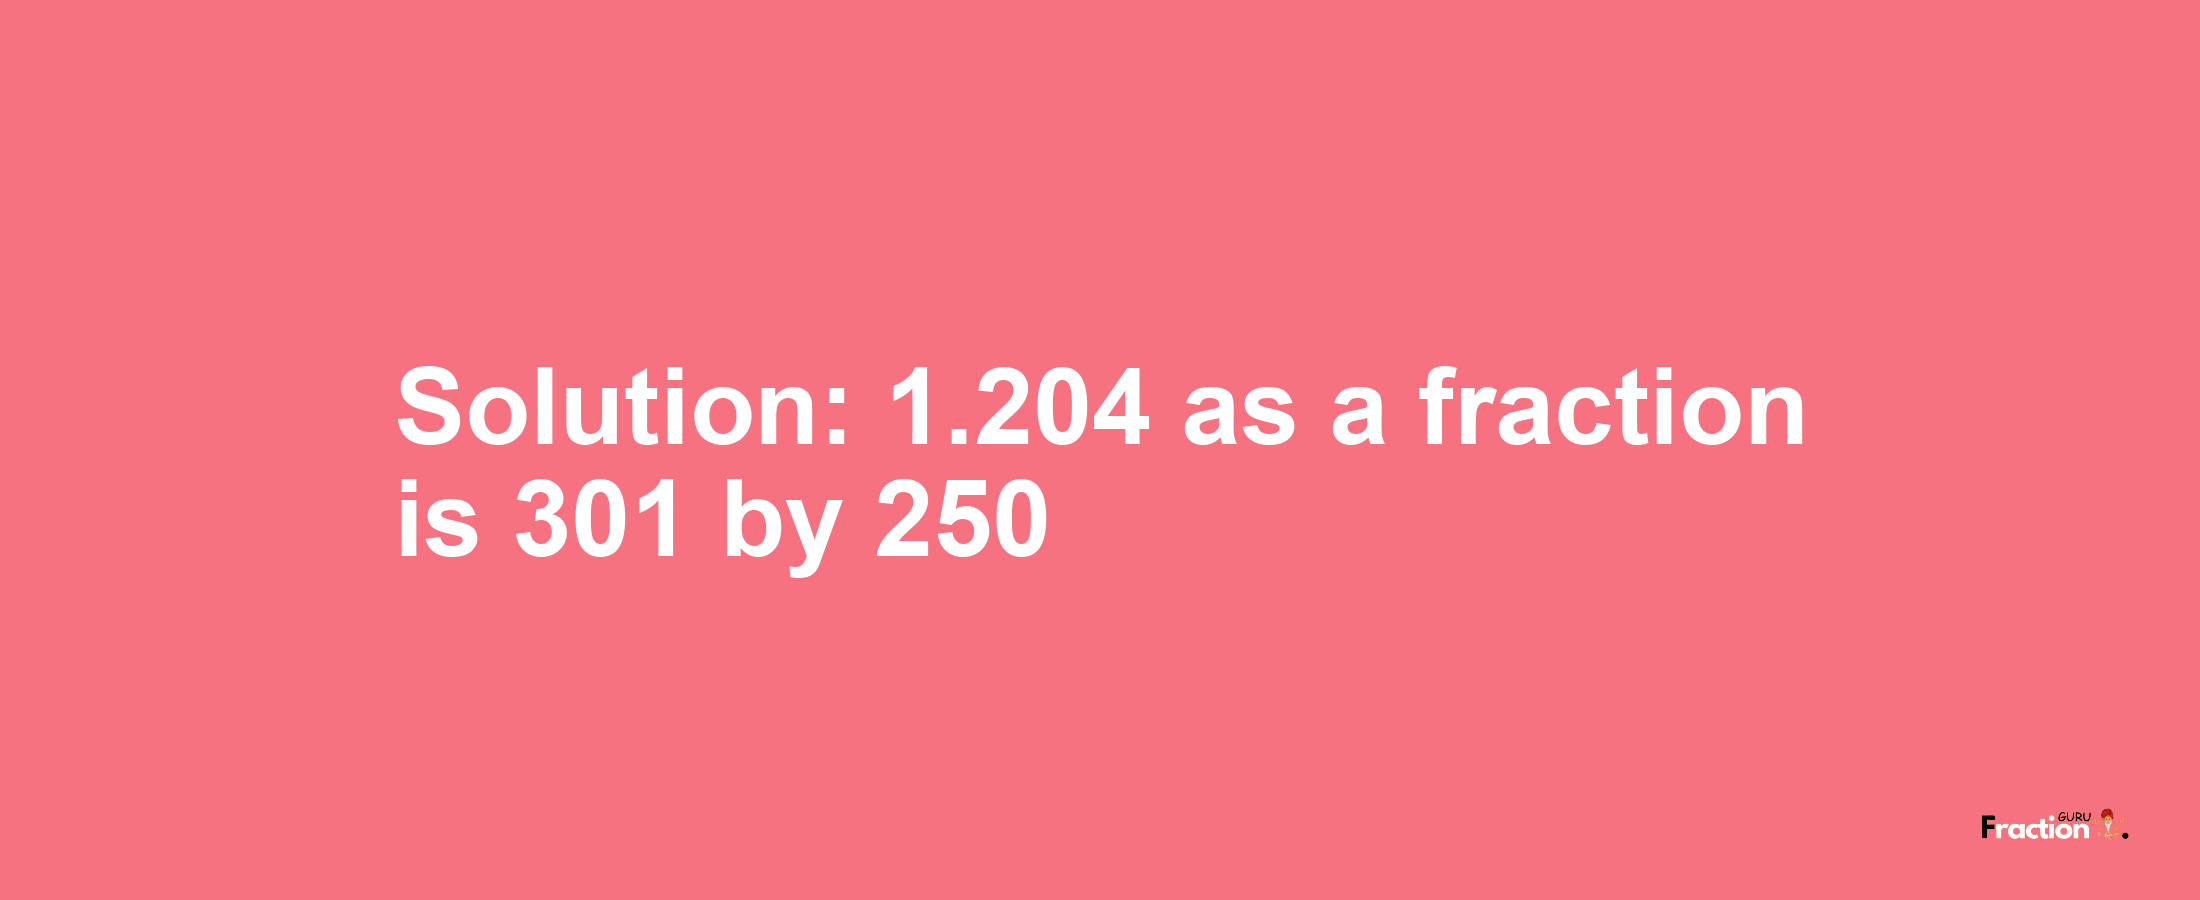 Solution:1.204 as a fraction is 301/250